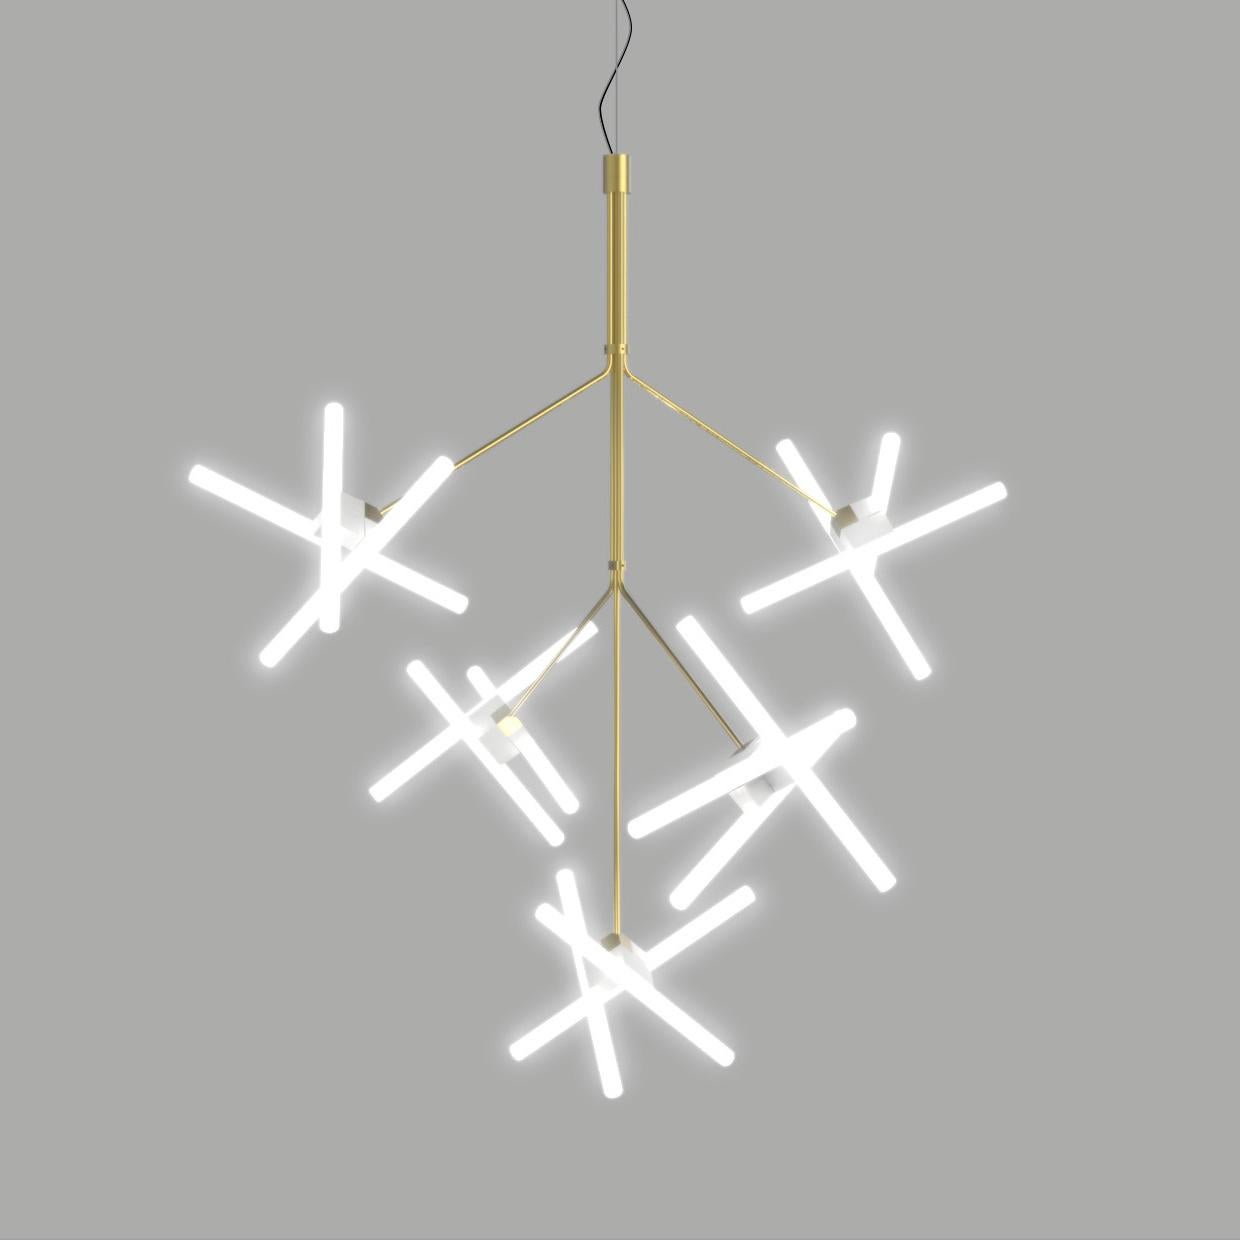 Olvidada chandelier lamp designed by Pepe Cortes.
Manufactured by BD Barcelona 

Steel structure and lamp holder nucleas with a brass scotch polished finish. Linestras 9W LED.
Linestras 9W LED S14D 3x9W LED suitable for 110 v. and v 220. 
Certified